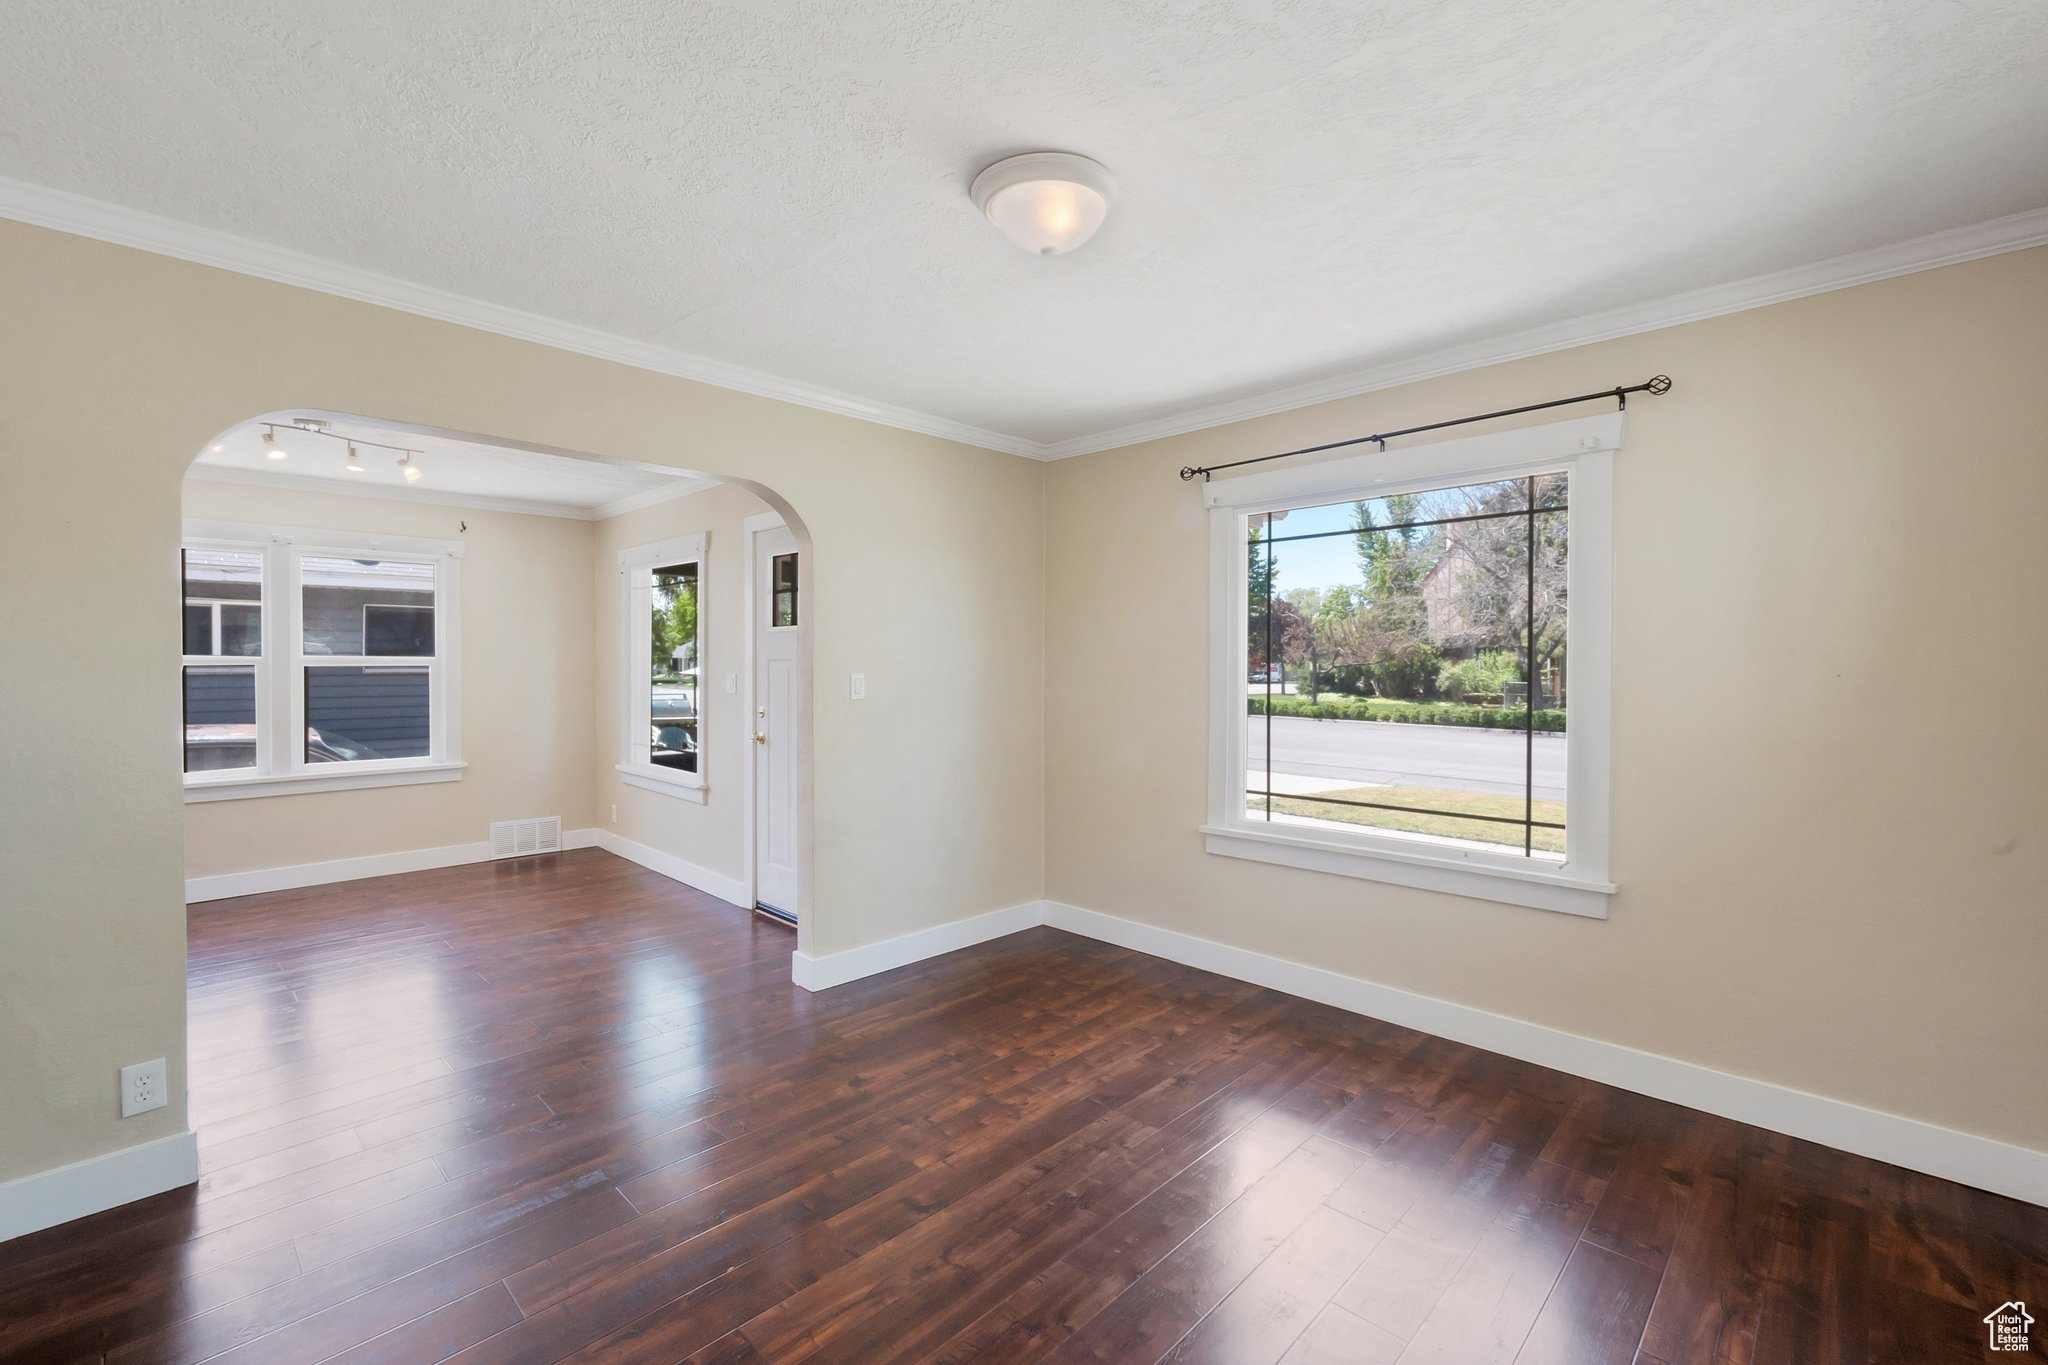 Empty room with crown molding, hardwood / wood-style flooring, and plenty of natural light